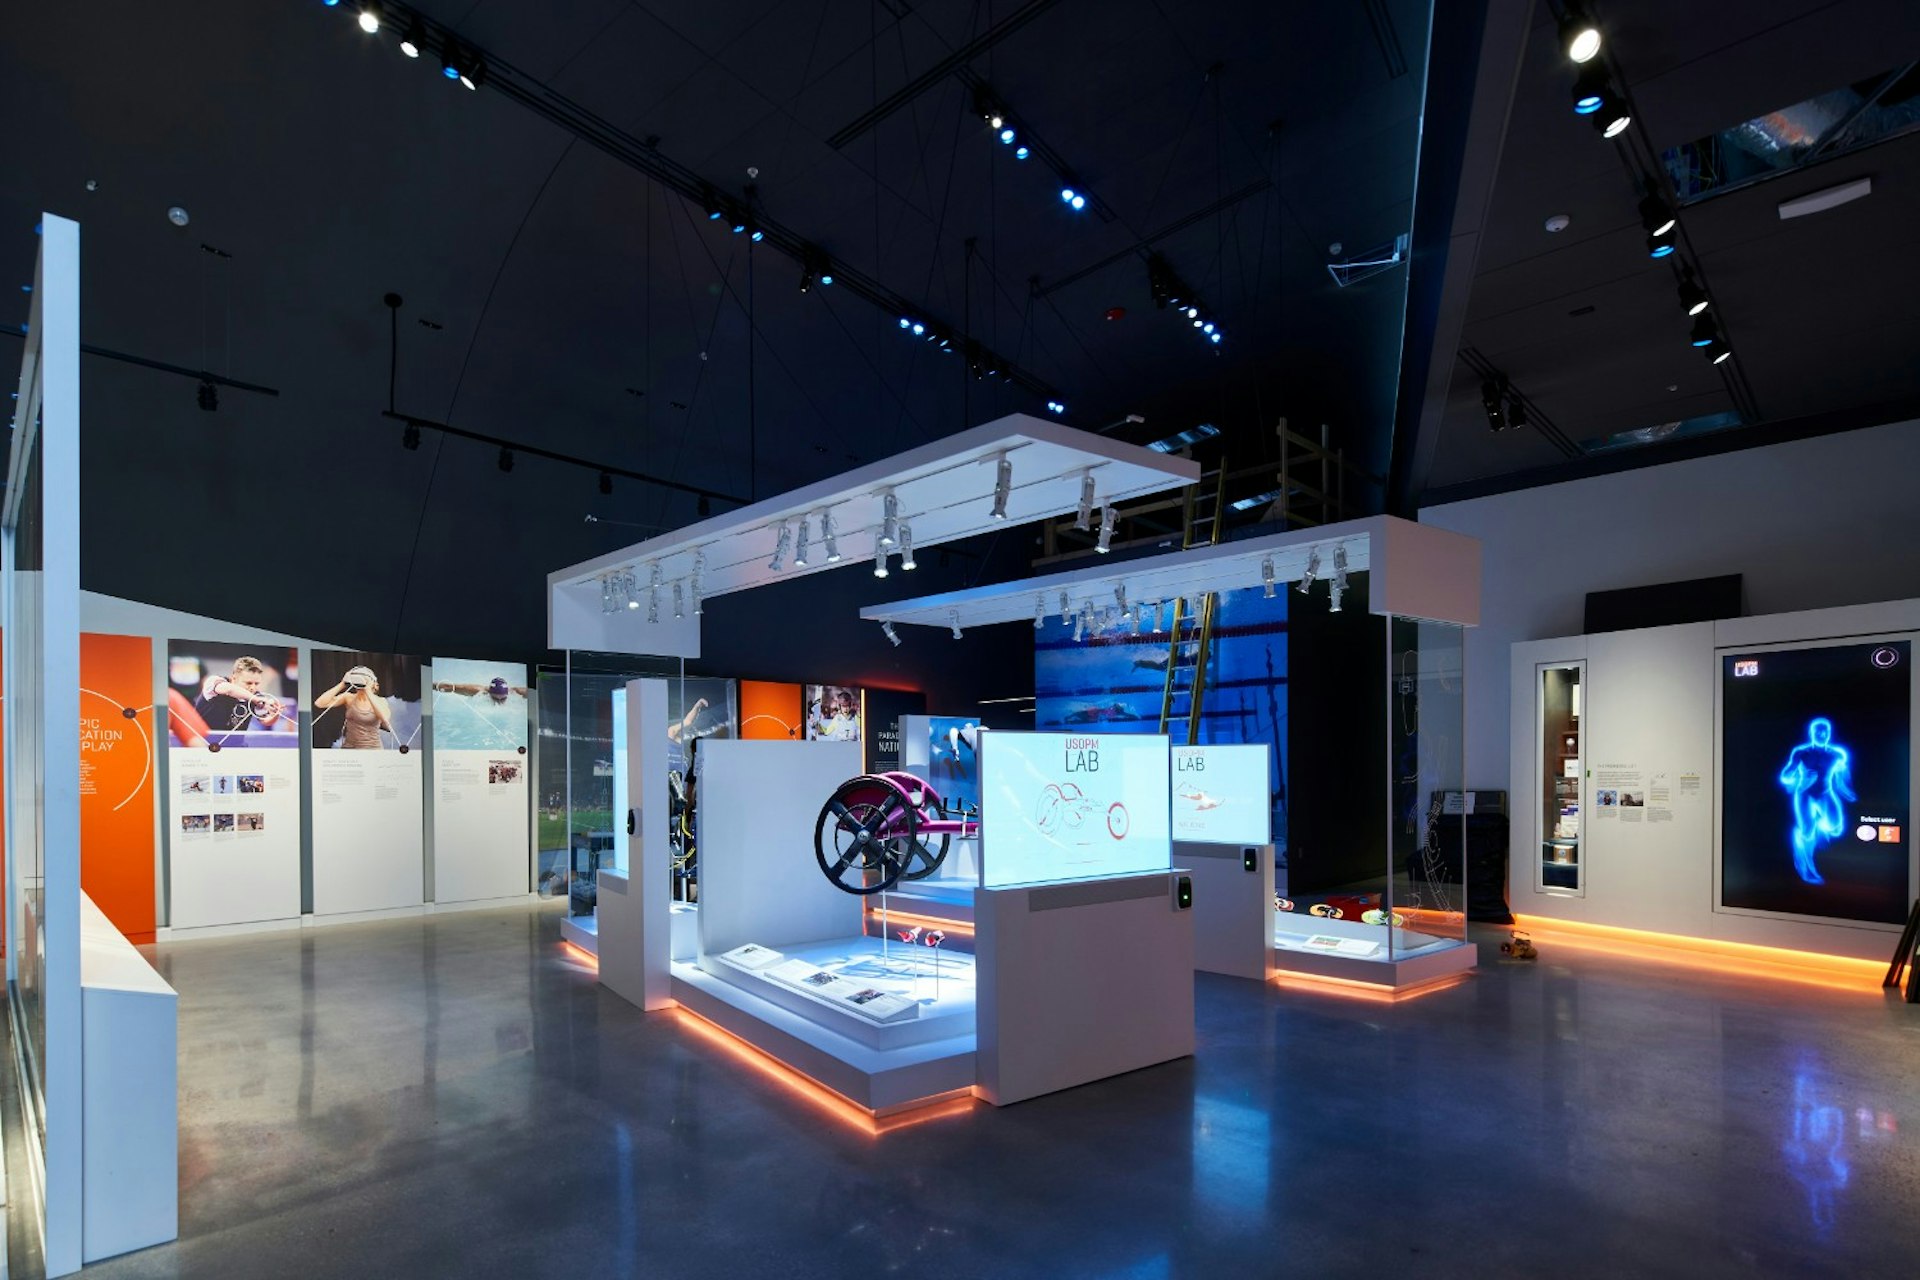 The US Olympic and Paralympic Museum